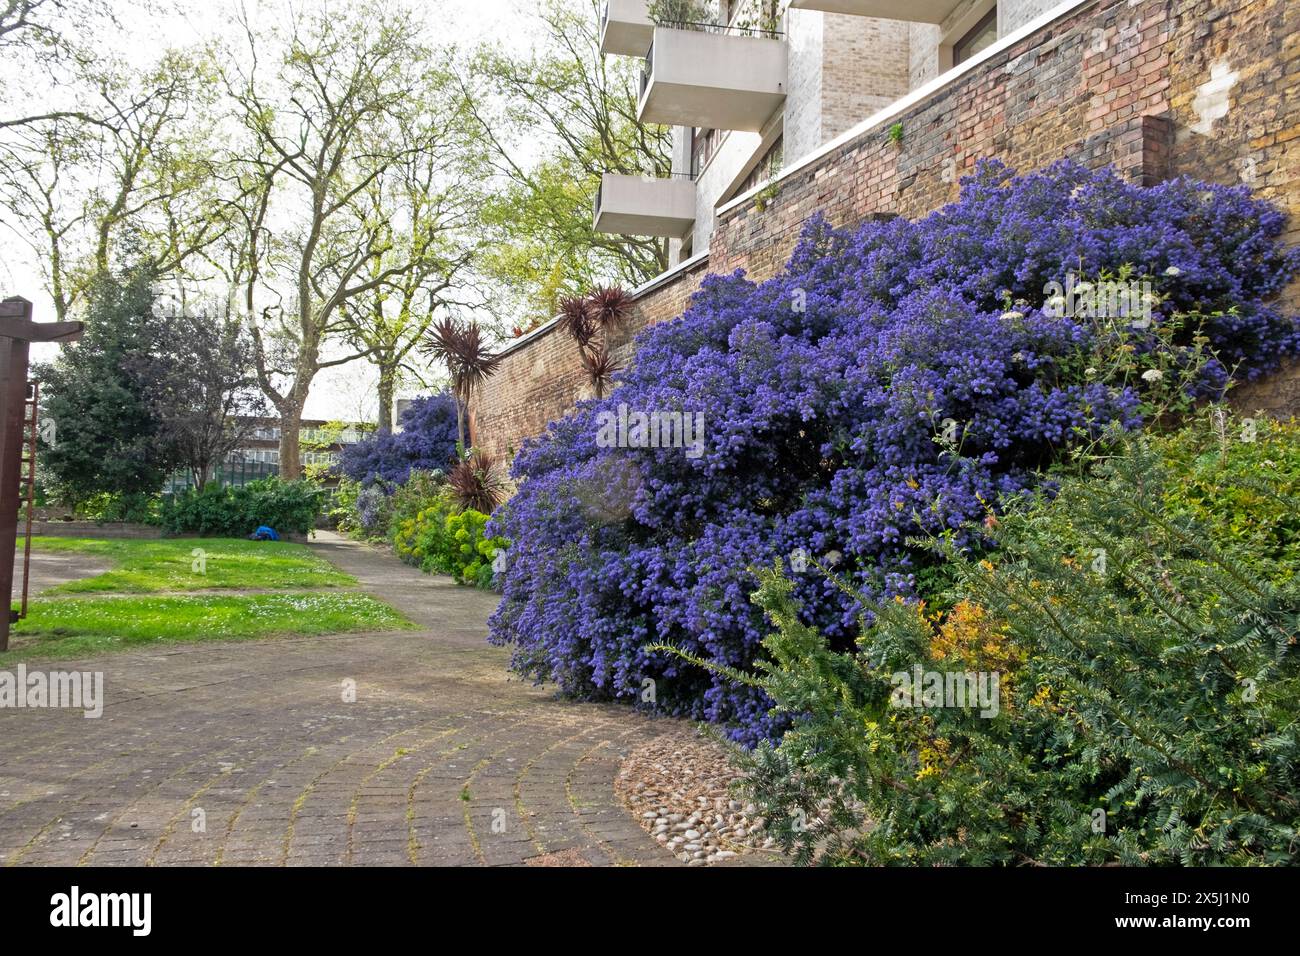 Ceanothus purple blue shrub plant flowering in bloom in a park by a brick wall in April spring Bermondsey South London England UK Britain KATHY DEWITT Stock Photo